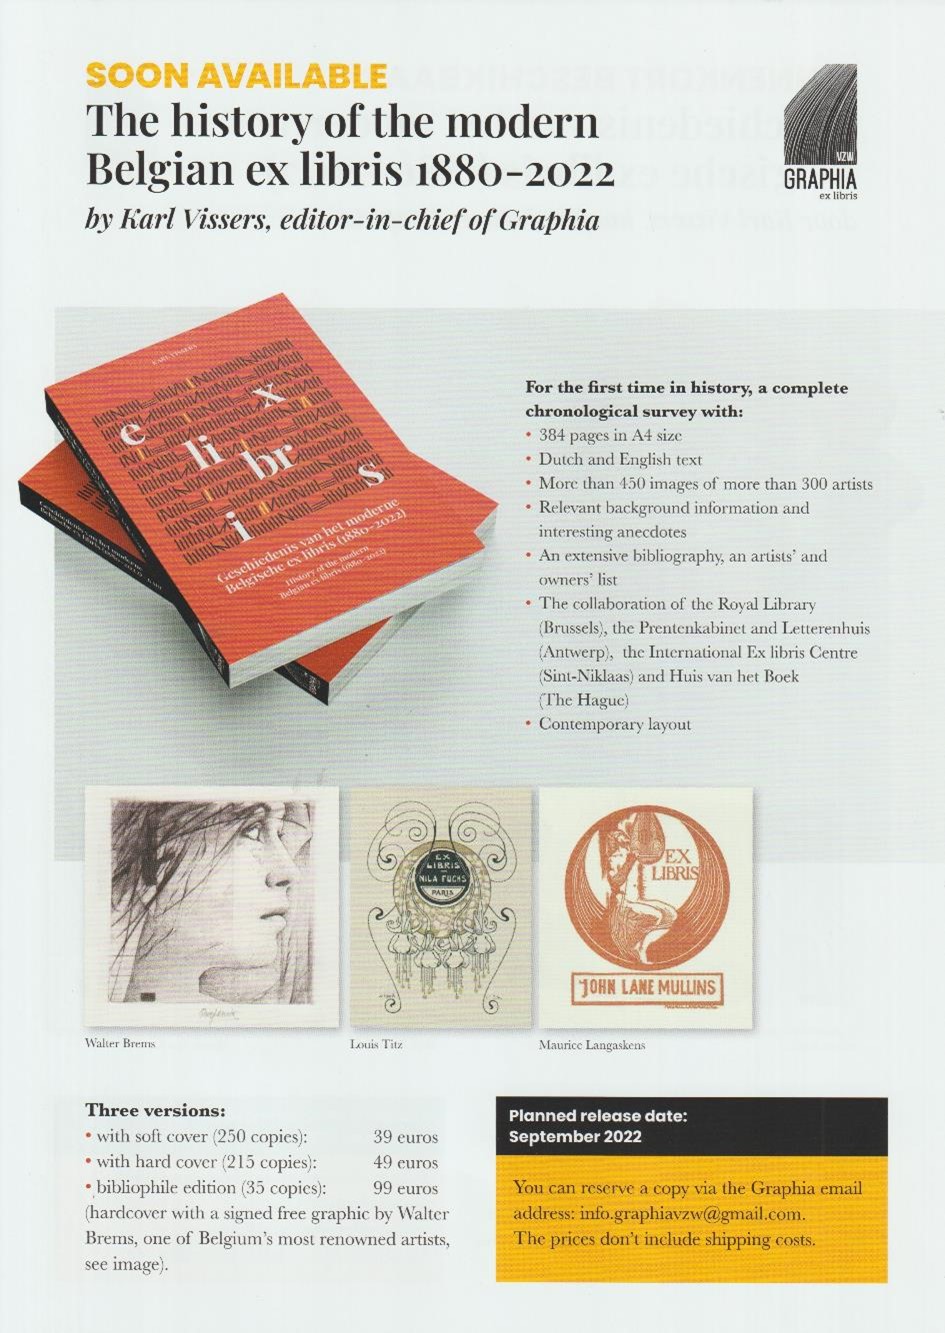 Promotion flyer The history of the modern Belgian ex libris